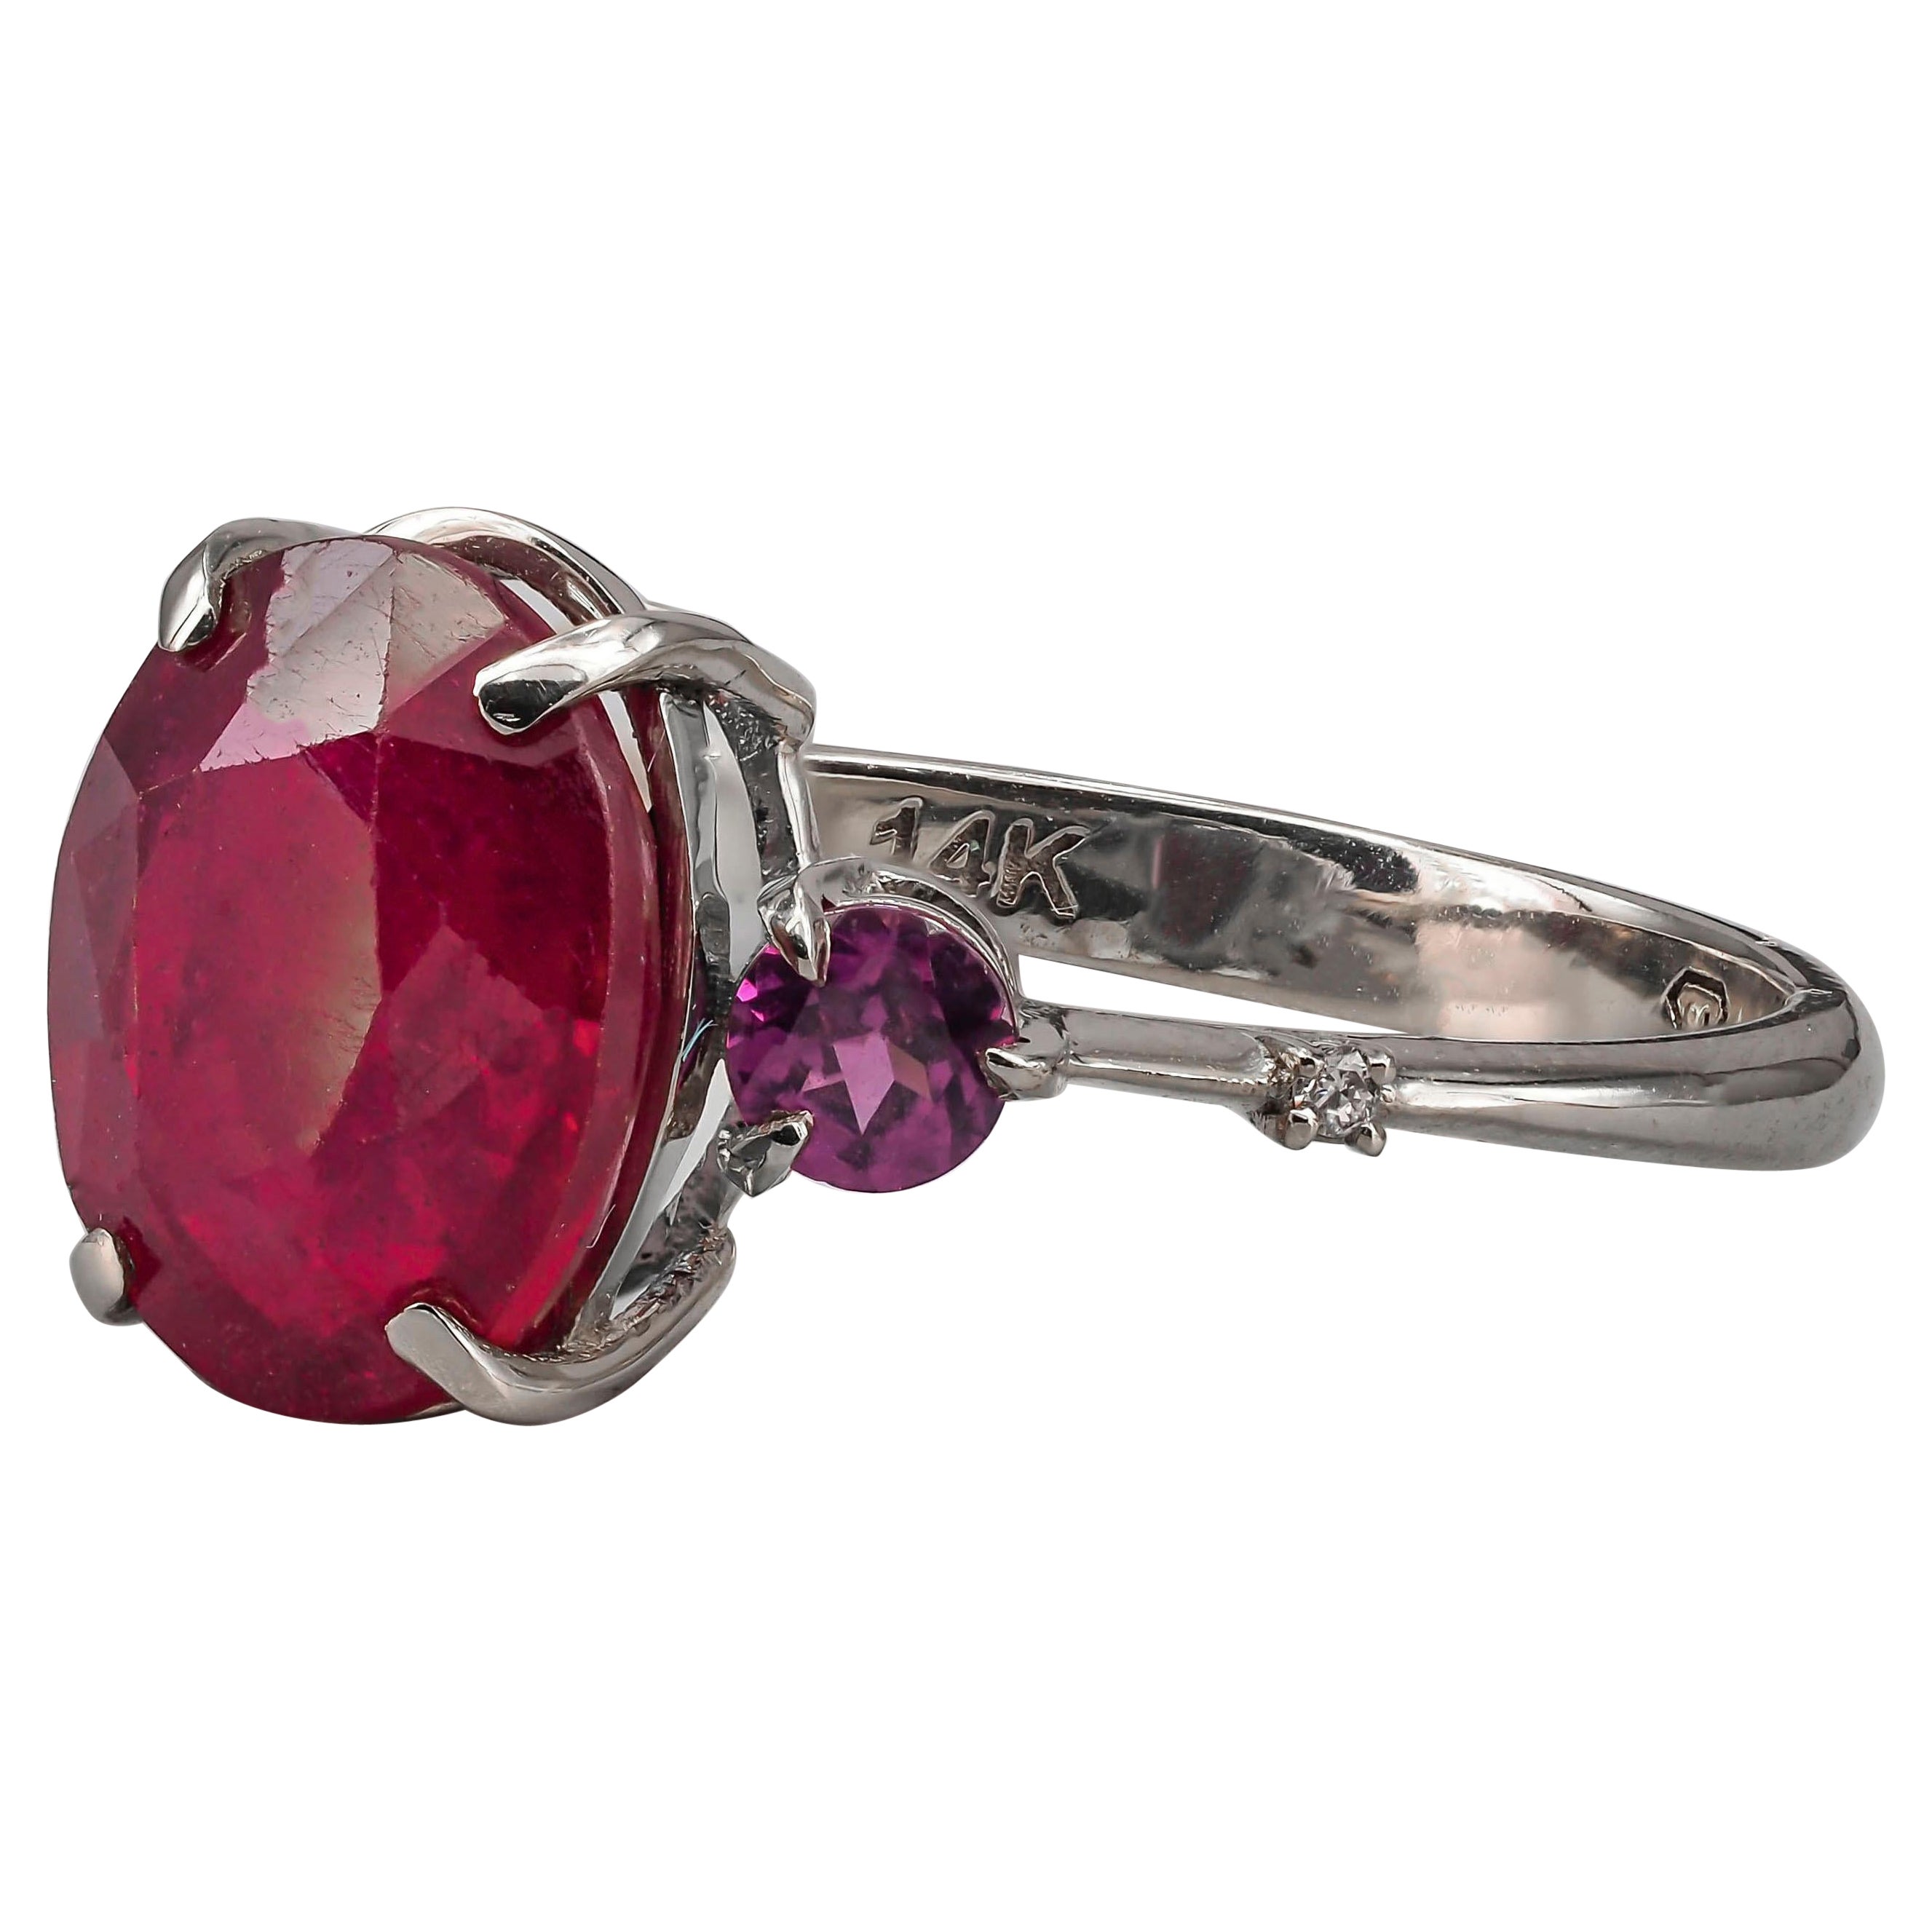 Ruby ring in 14k gold. Oval ruby ring. Solitaire ring with ruby. Ruby engagement ring. Genuine ruby ring. Red gemstone ring.

Metal: 14k solid gold
Weight: 2.2 g (depends from size)
Main stone - ruby, red color, oval cut, 1.50-1.70 ct weight, si